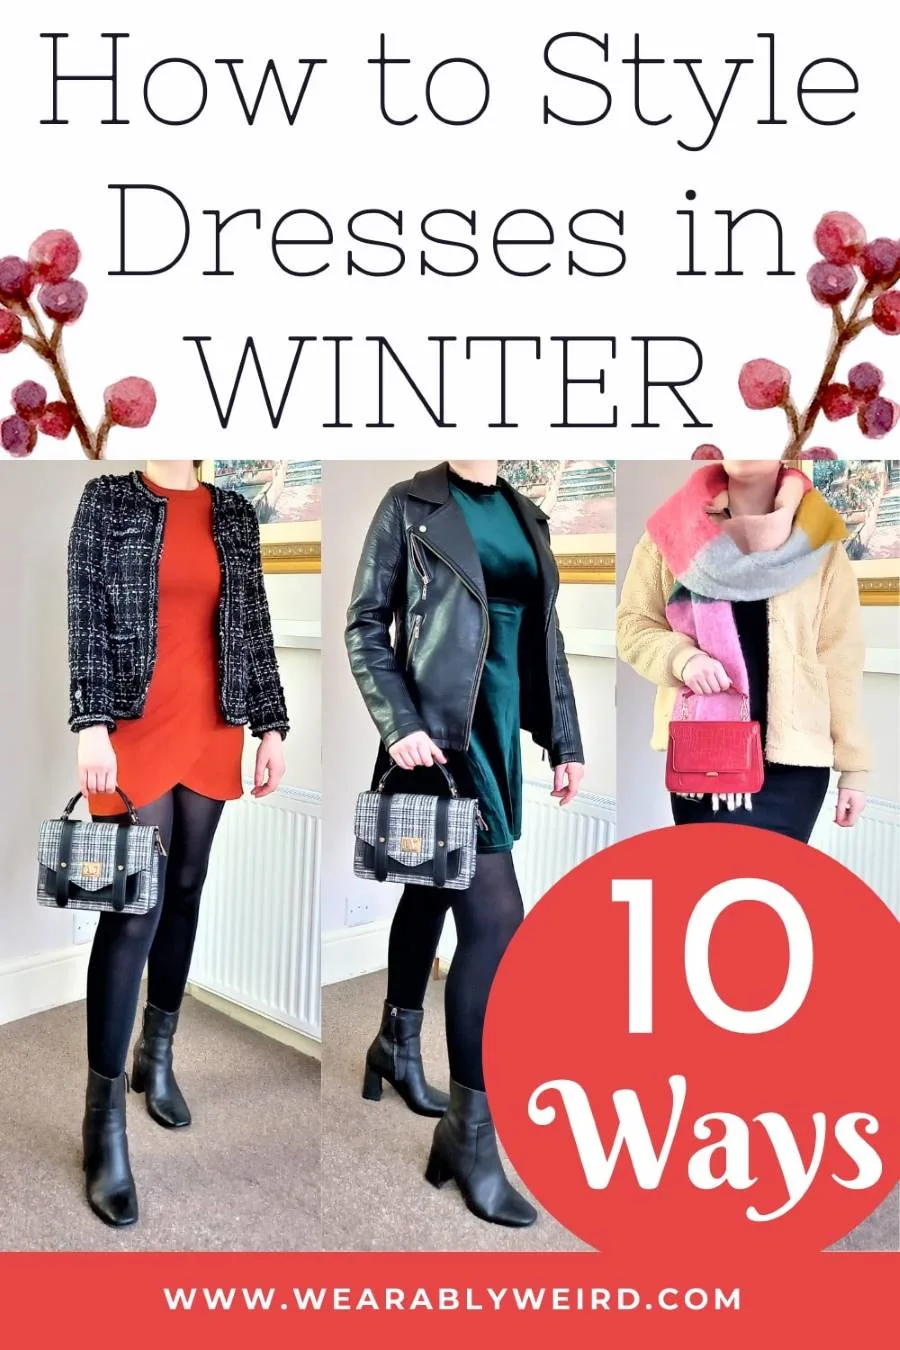 10 ways to style dresses in winter